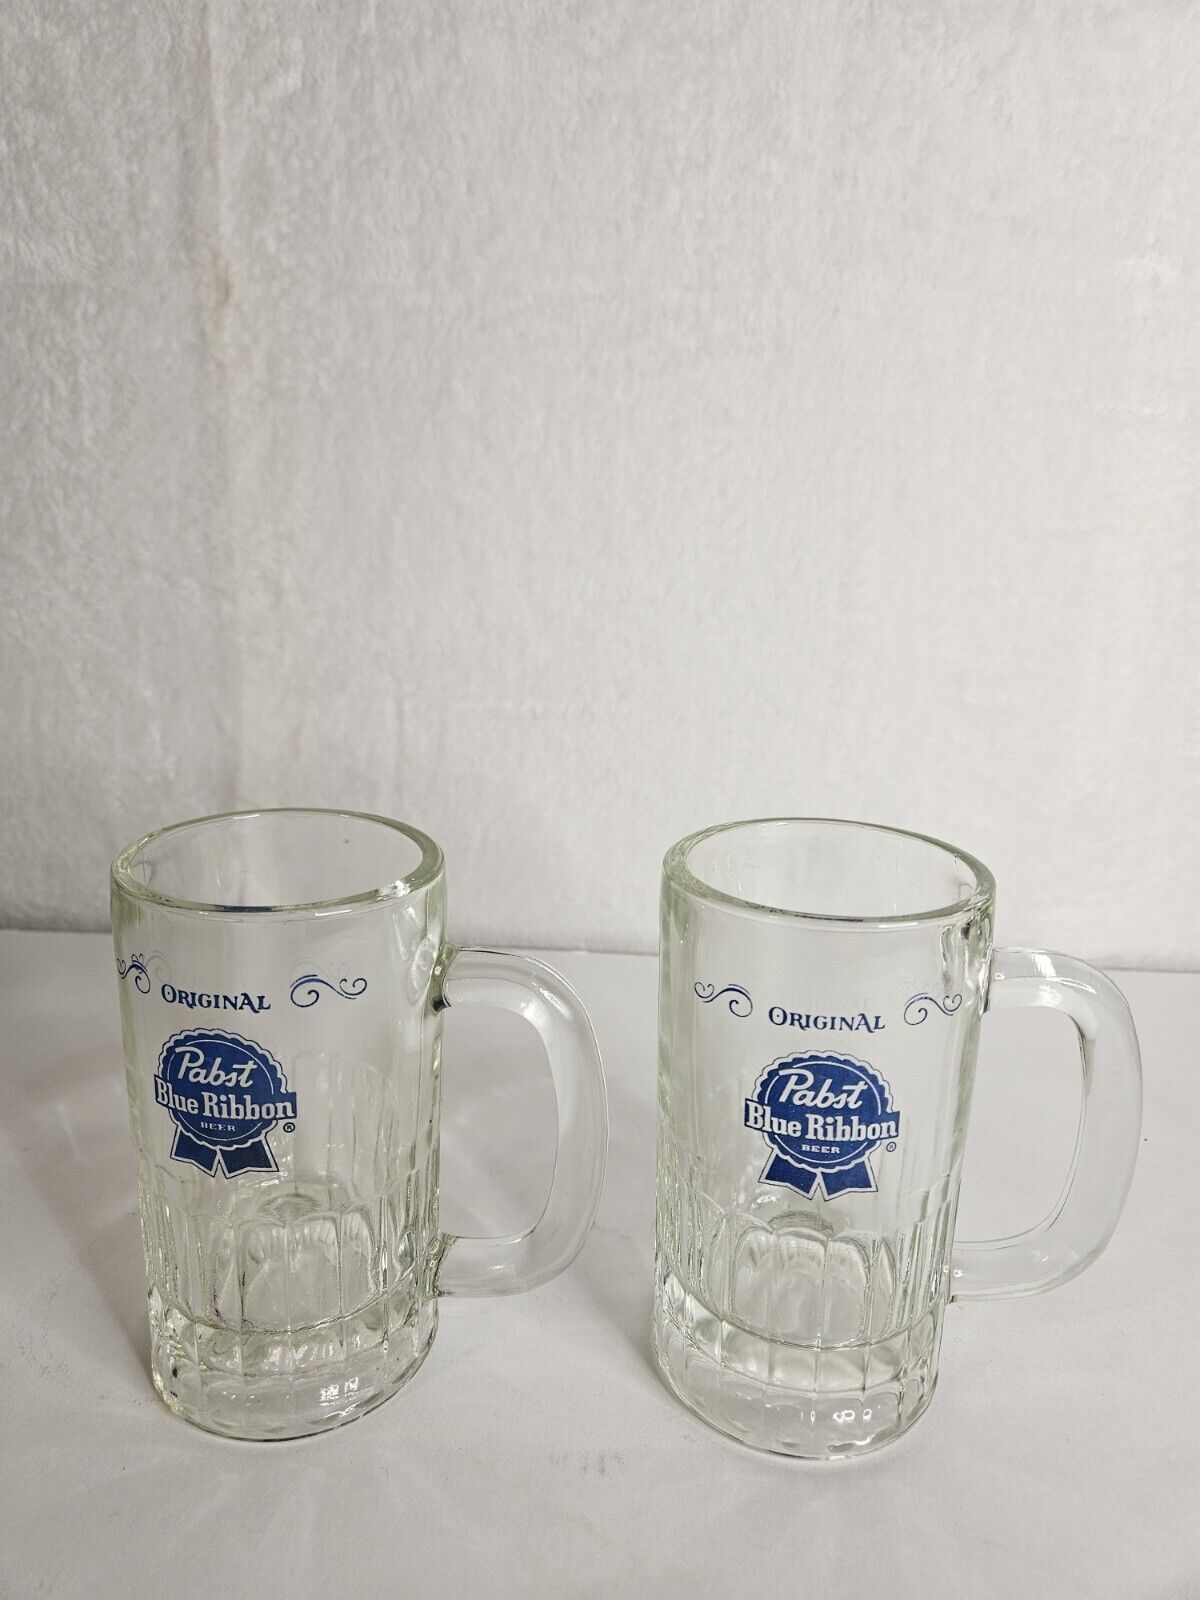 2 Classic 1960s PABST BLUE RIBBON 5½ inch heavy glass beer mugs Tavern Trove